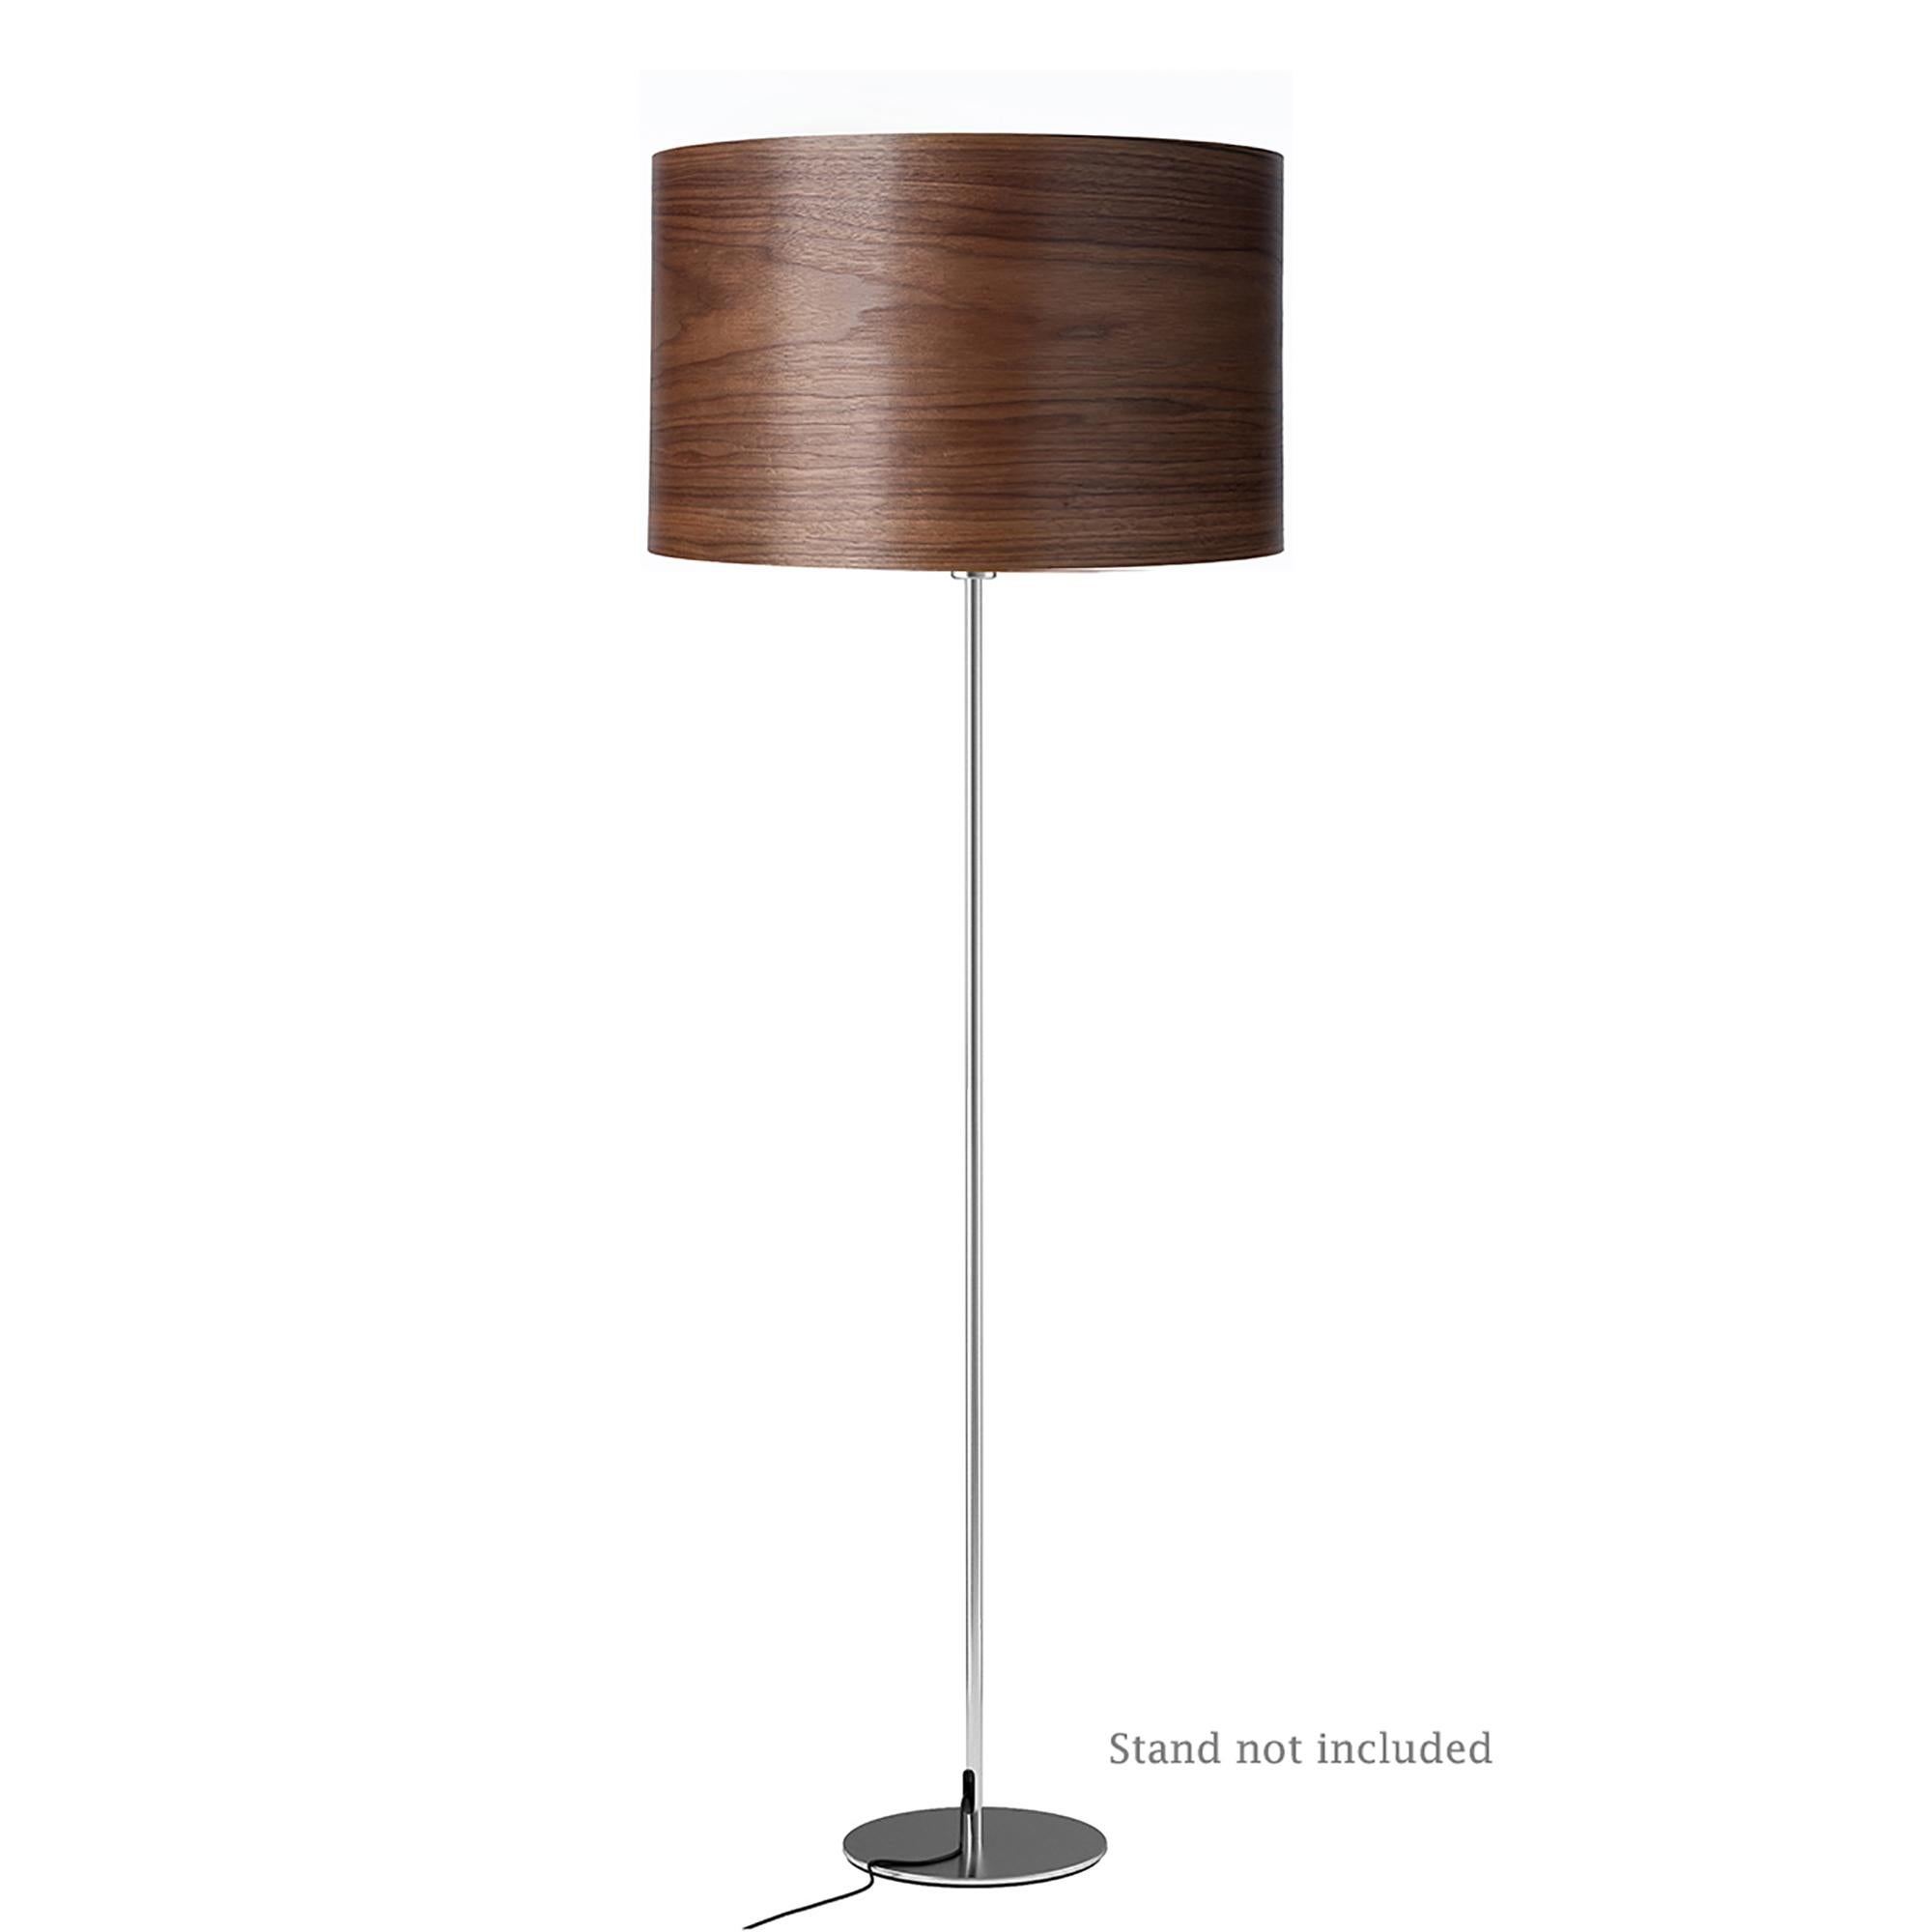 DEXTER is a large wood veneer lampshade. This Organic Modern look is a contemporary statement for an office, living room, or entryway. Walnut is prized by designers for its glorious tight grain pattern. We enhance this desirable appearance by